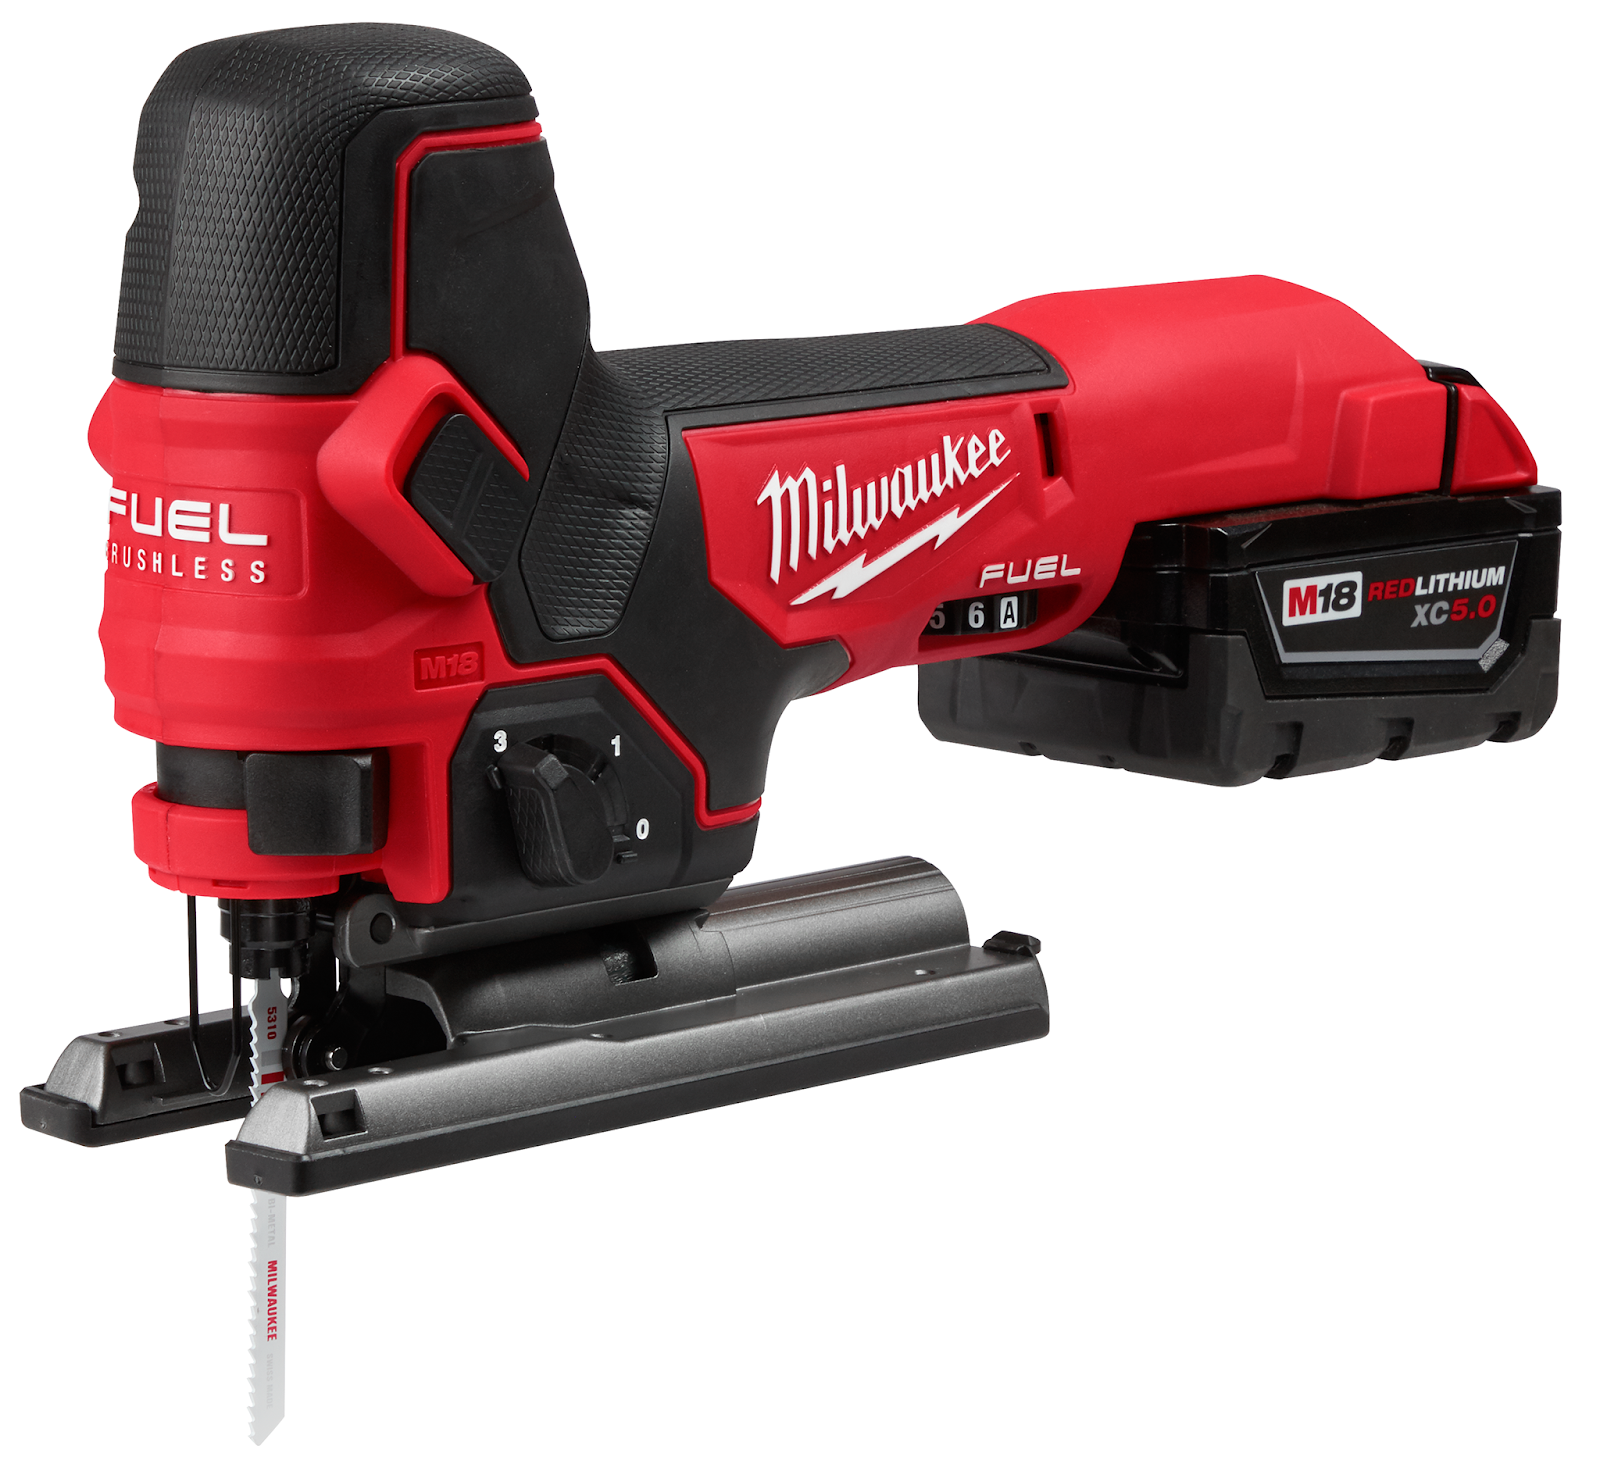 Tool Review Zone : Milwaukee Tool to release their all new M18 Fuel